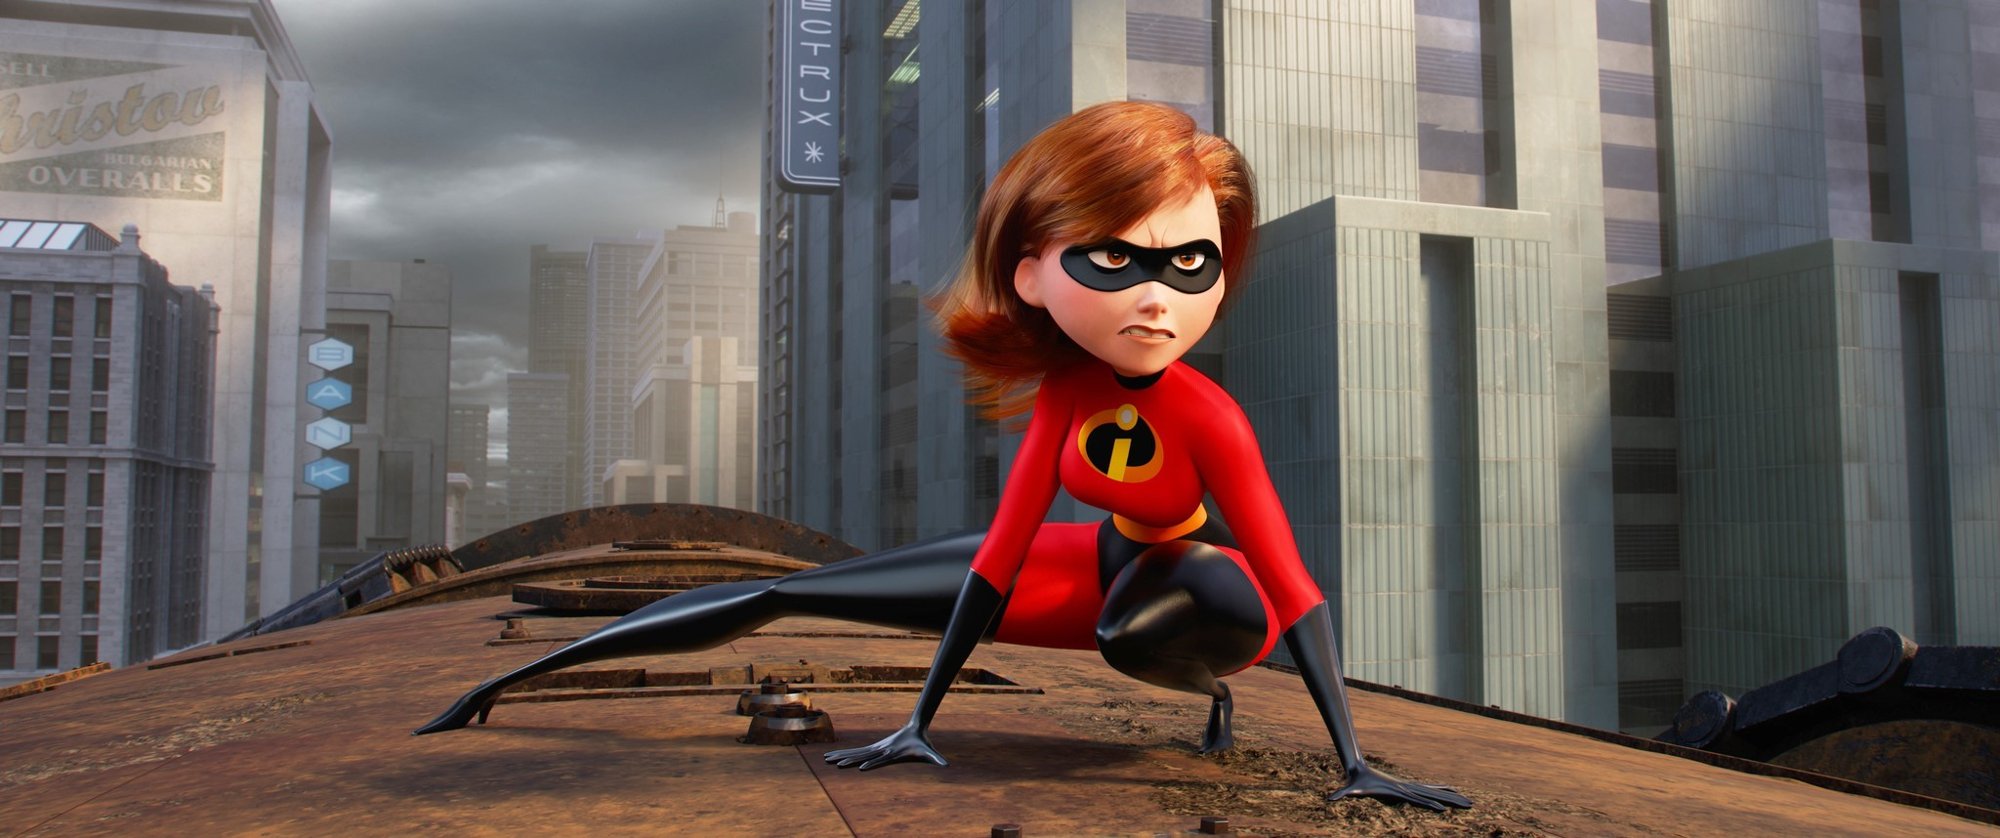 instal the new version for ios Incredibles 2